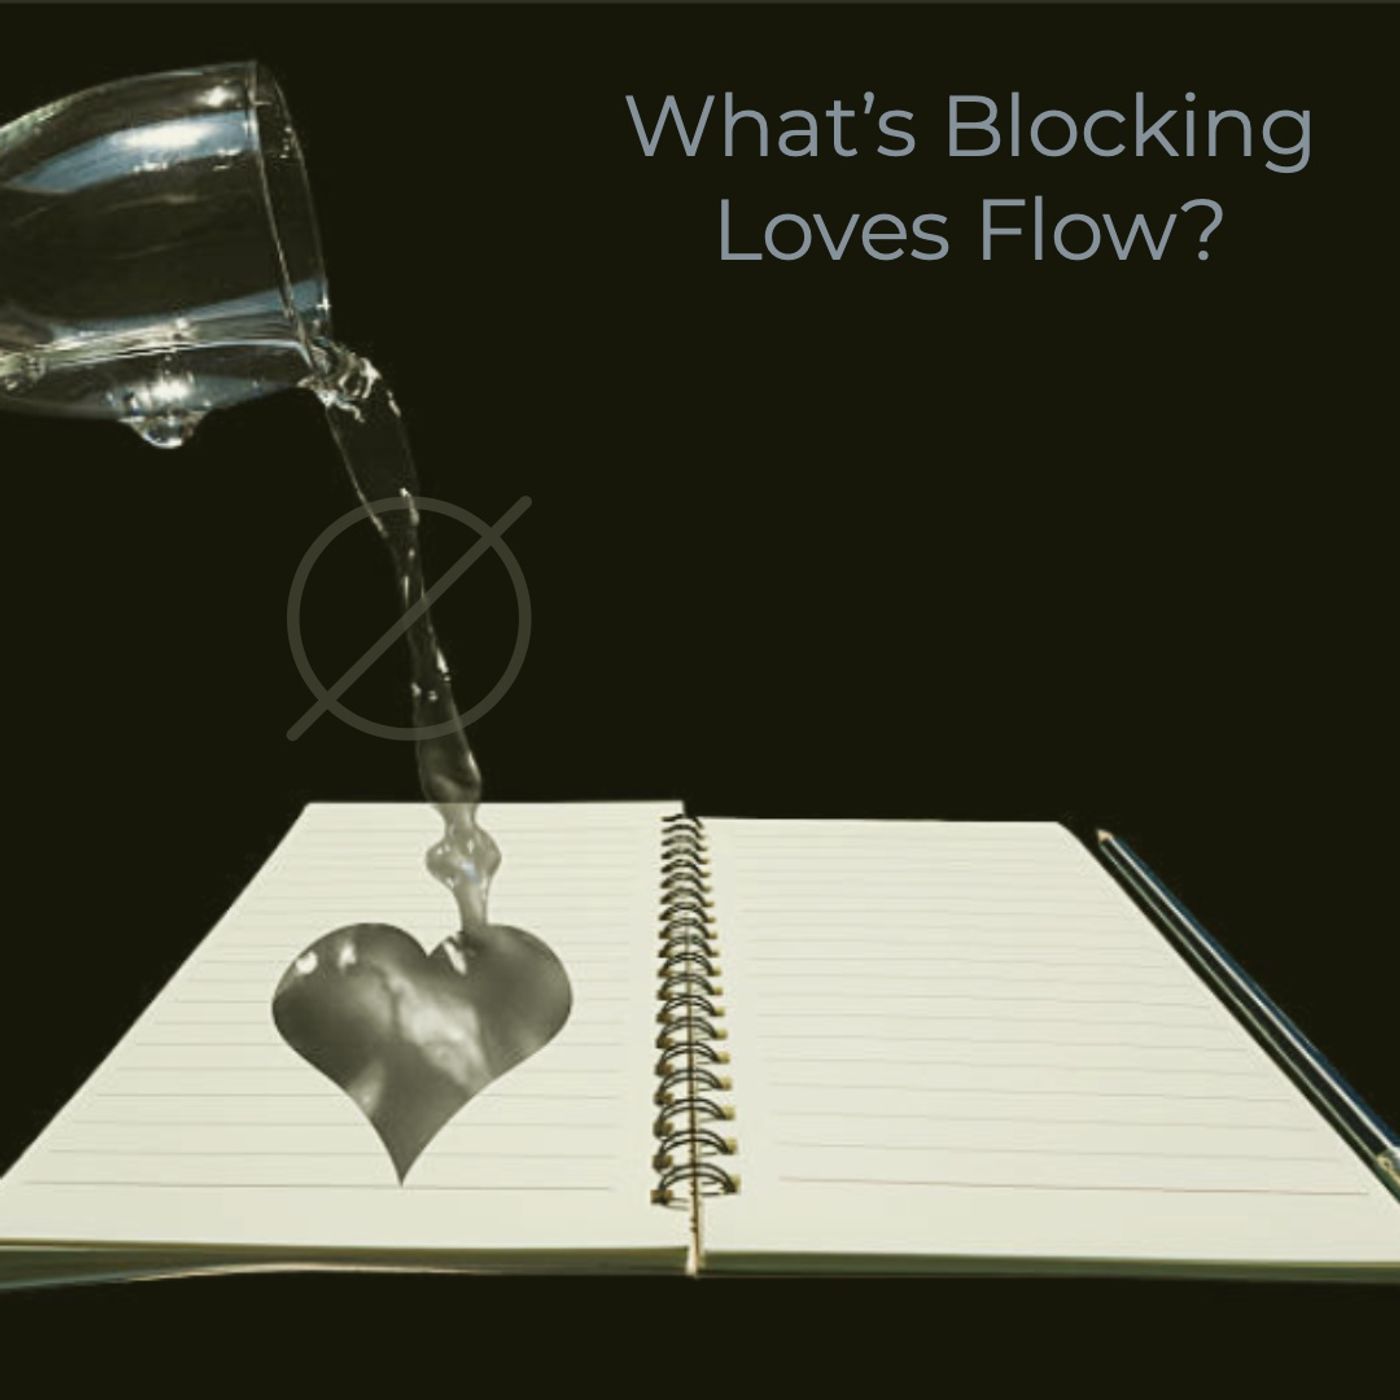 What's Blocking Loves Flow To You?